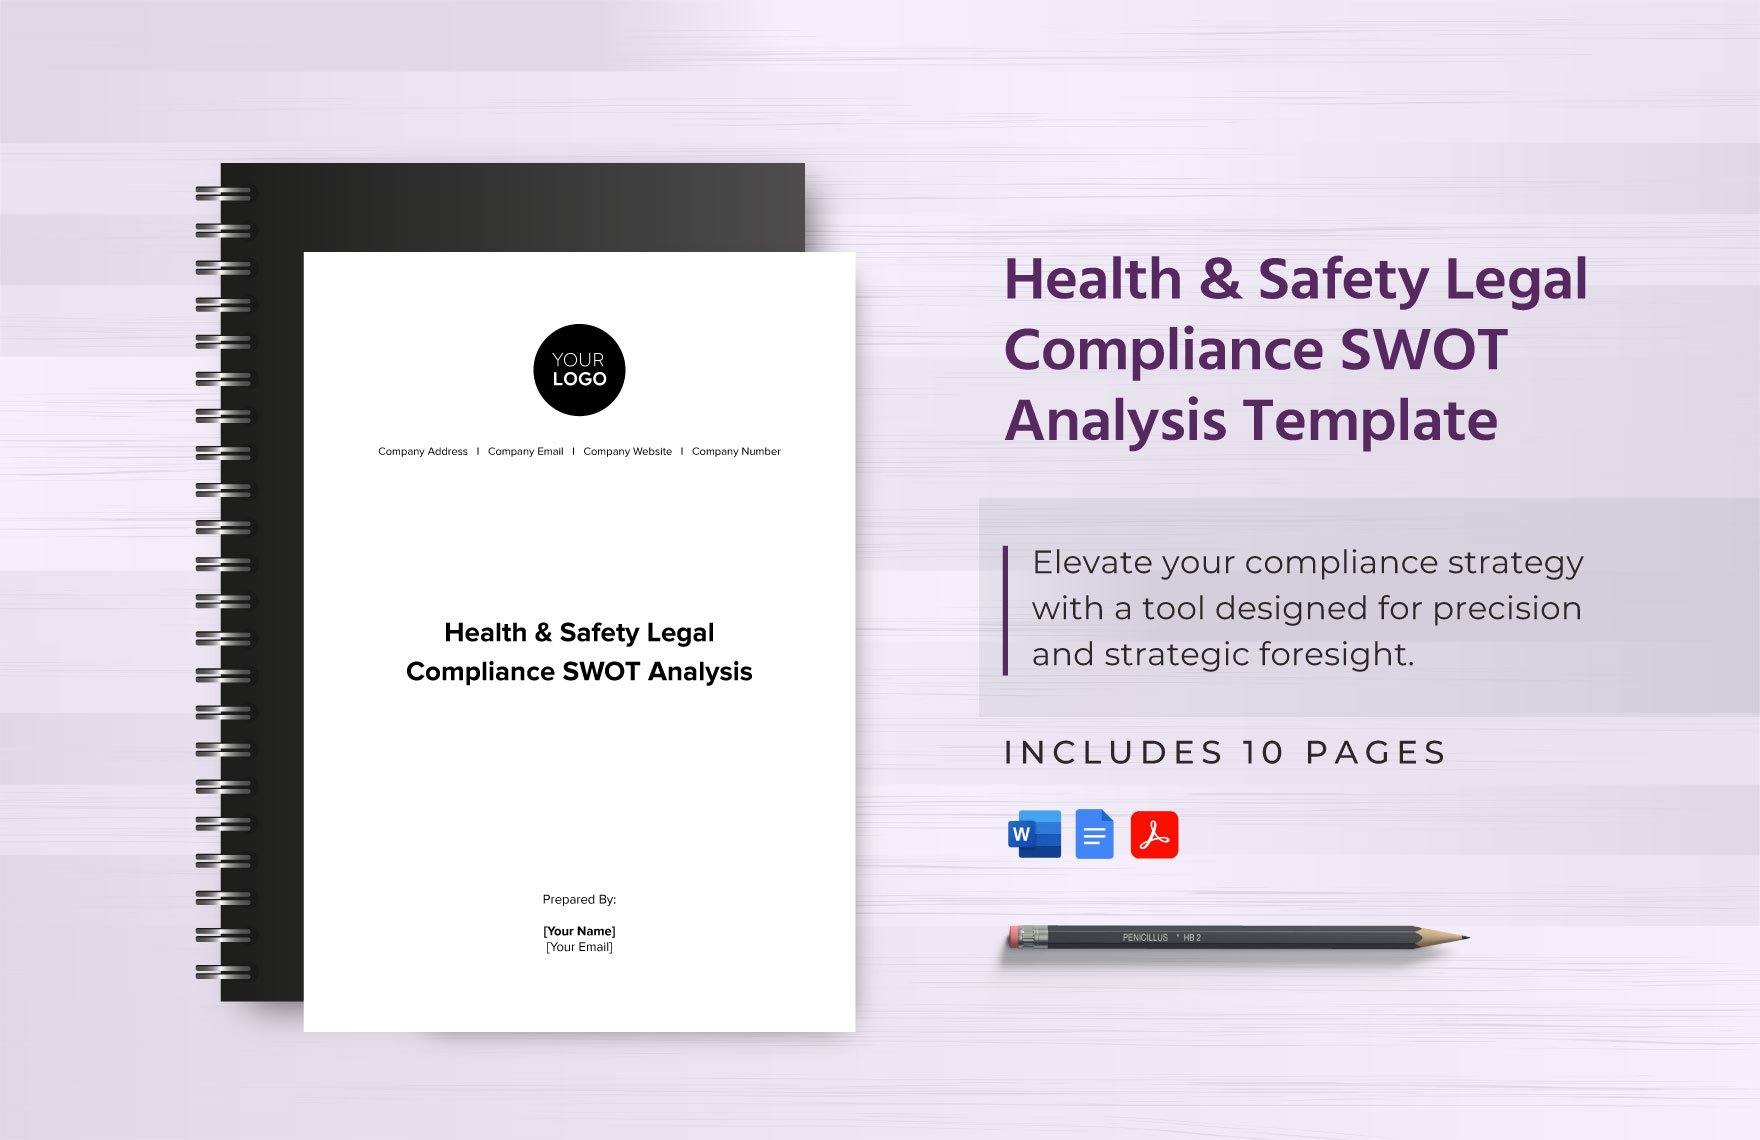 Health & Safety Legal Compliance SWOT Analysis Template